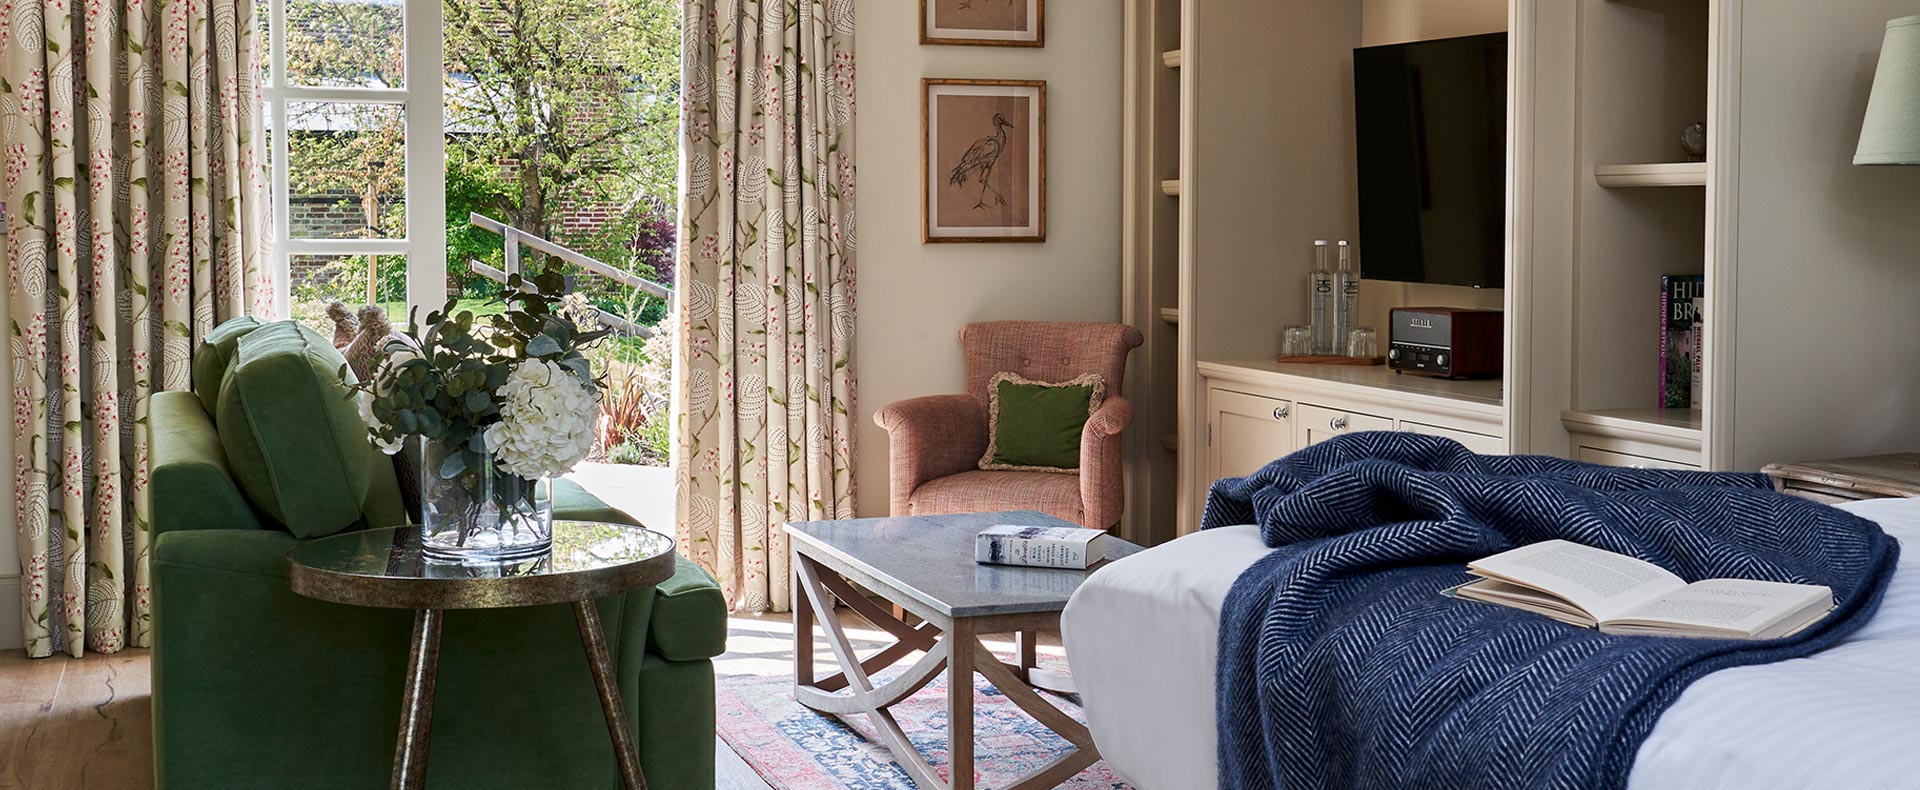 Courtyard Retreat, New Forest Hotel - The Montagu Arms